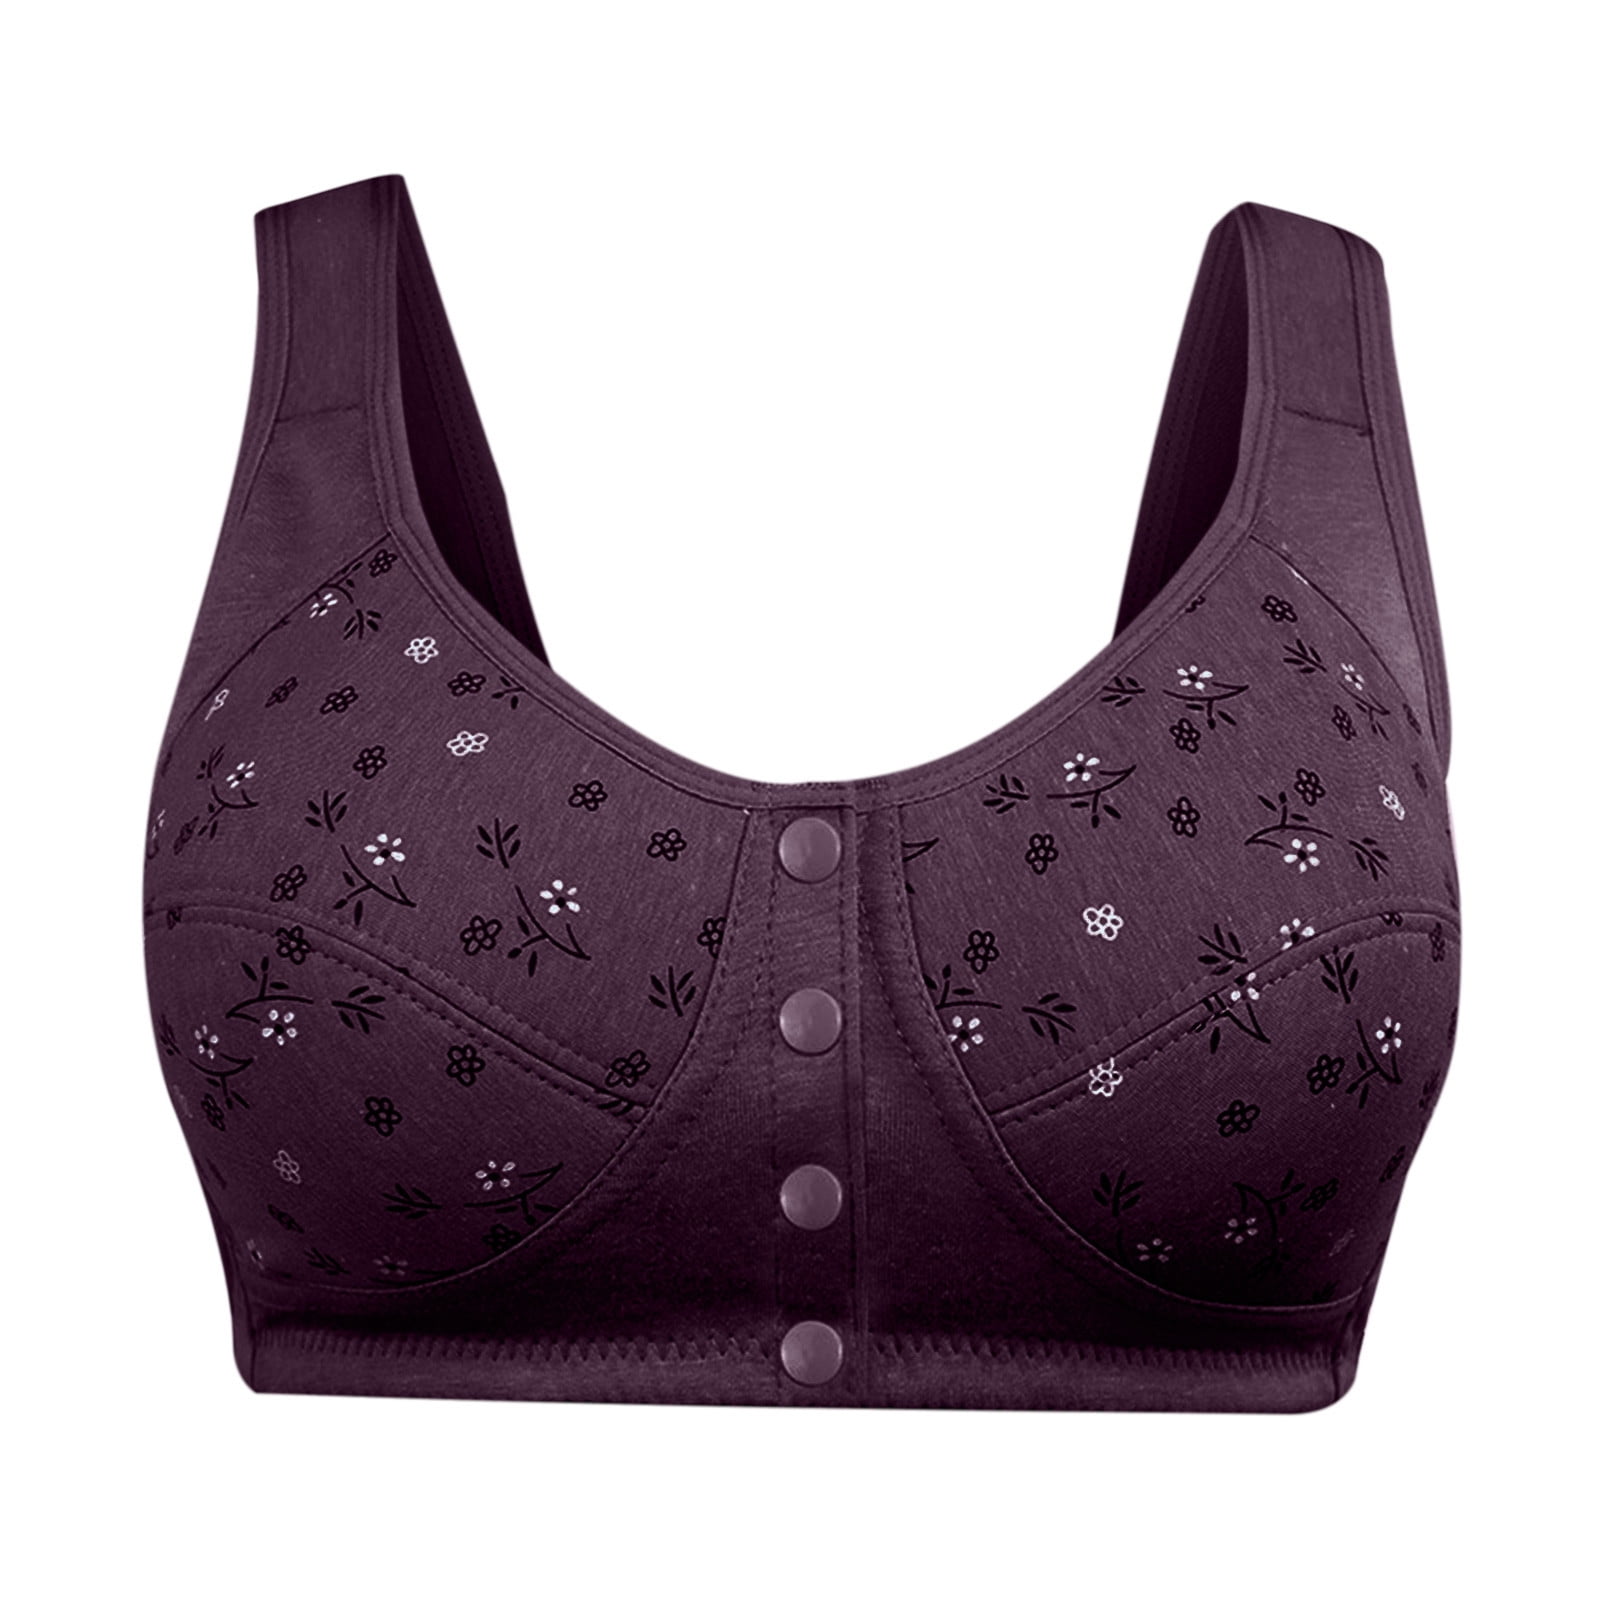 Front Button Closure Sport Bras for Women Comfort Wirefree Push Up